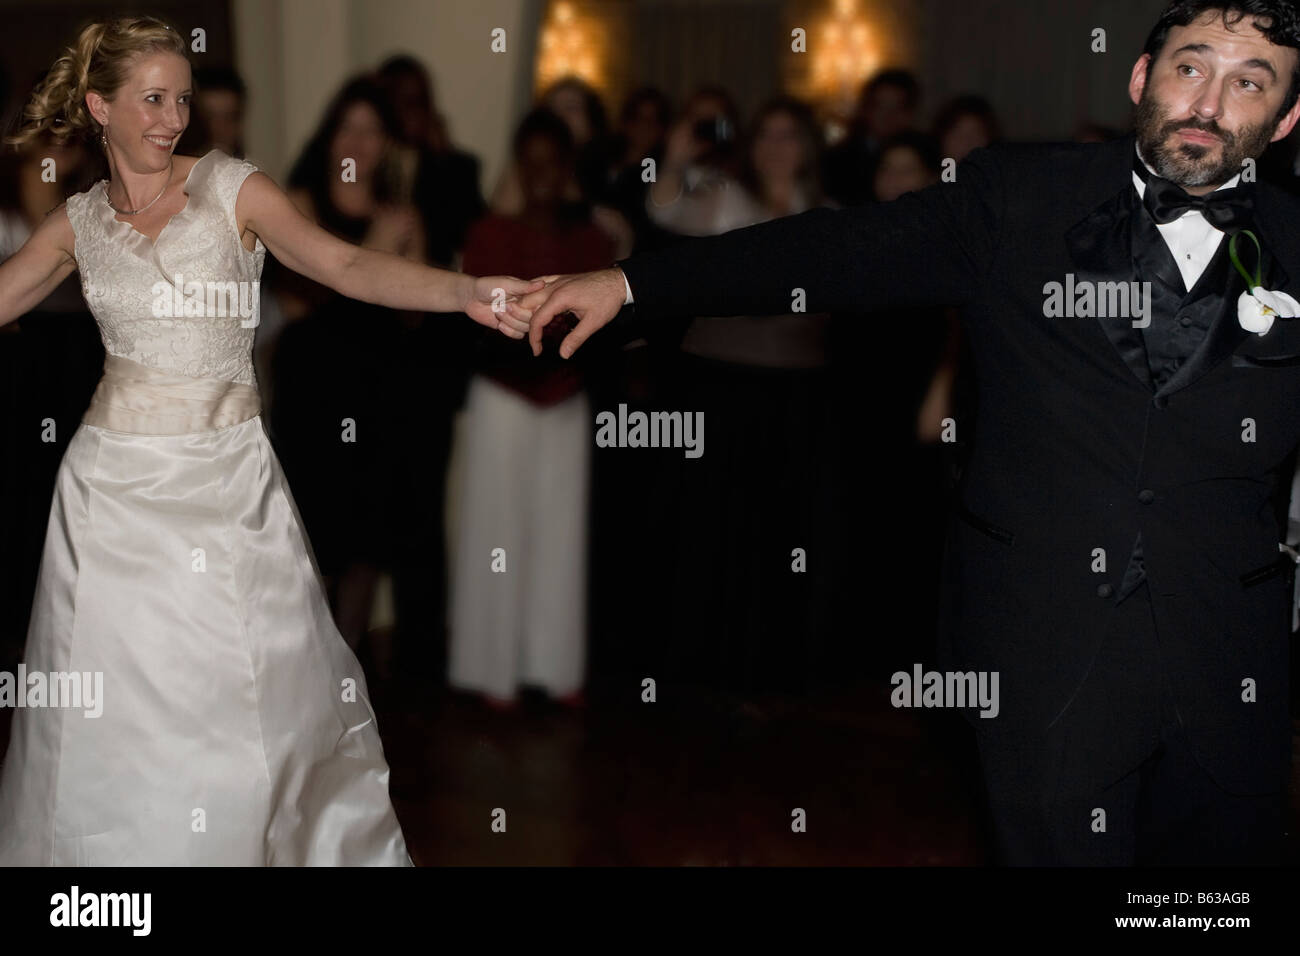 Mid adult woman dancing with a mature man Stock Photo